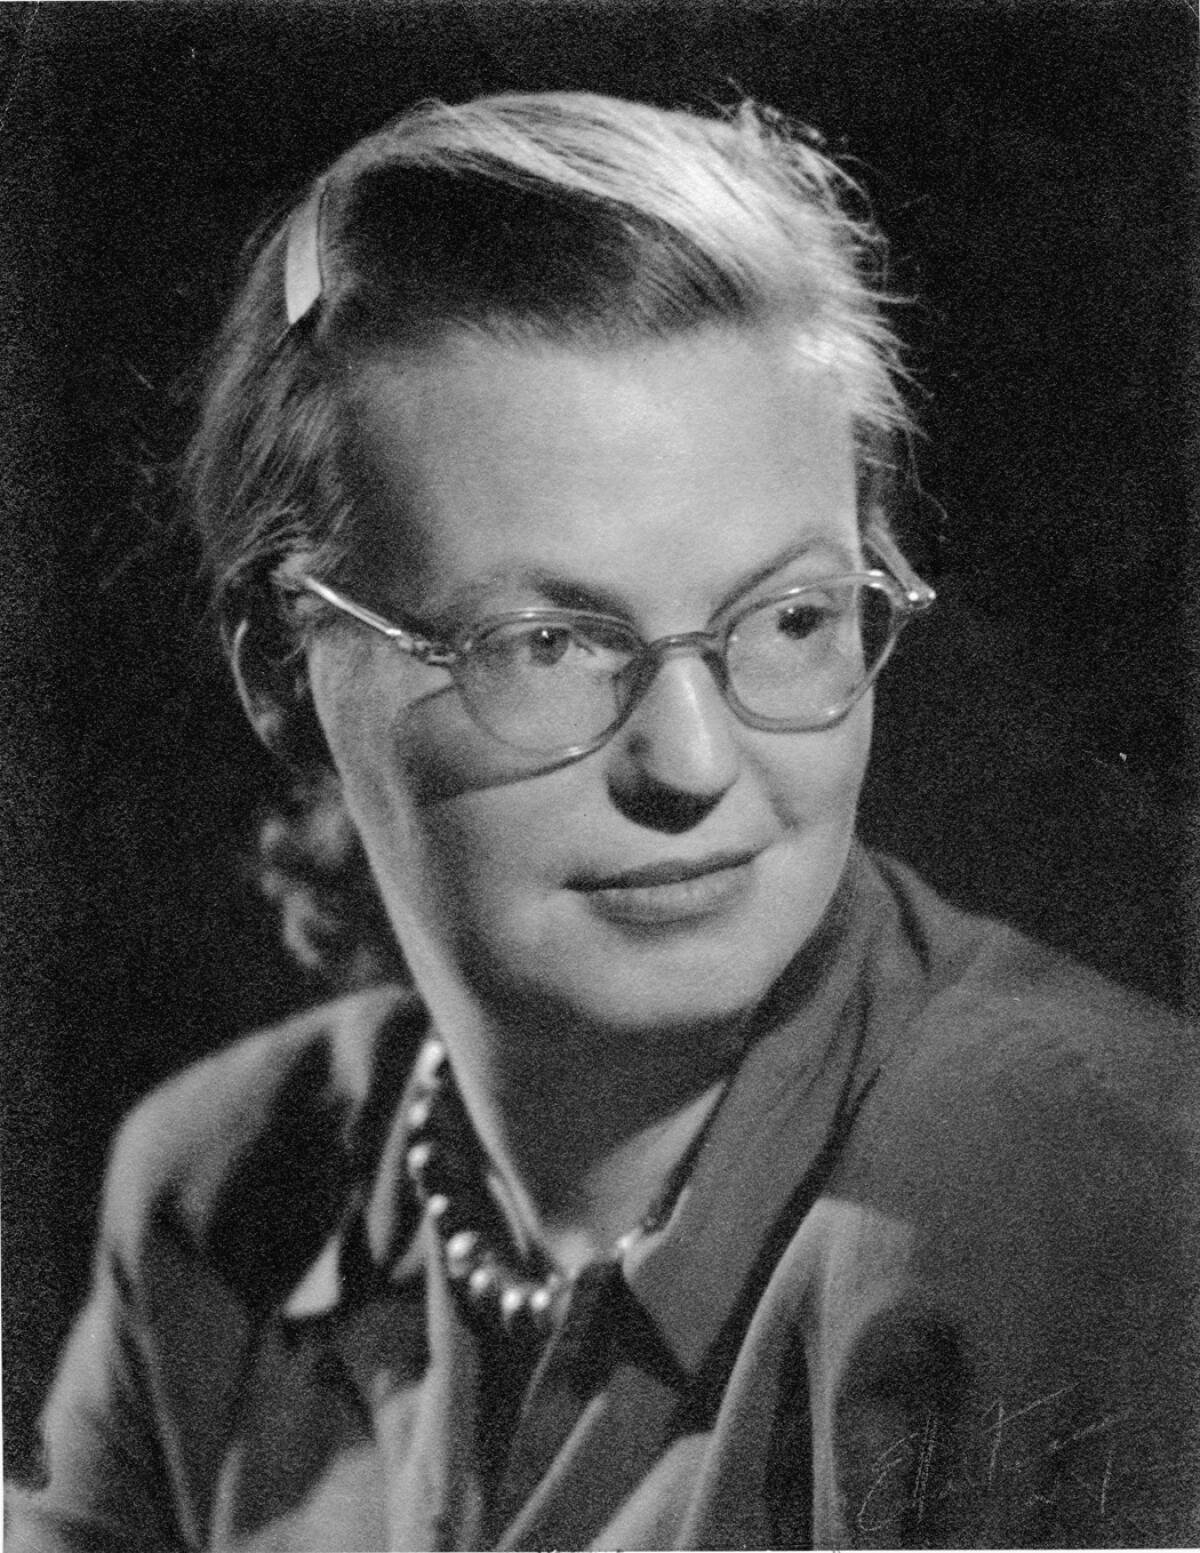 A black-and-white portrait of author Shirley Jackson, wearing glasses and pearls with a button-down blouse.